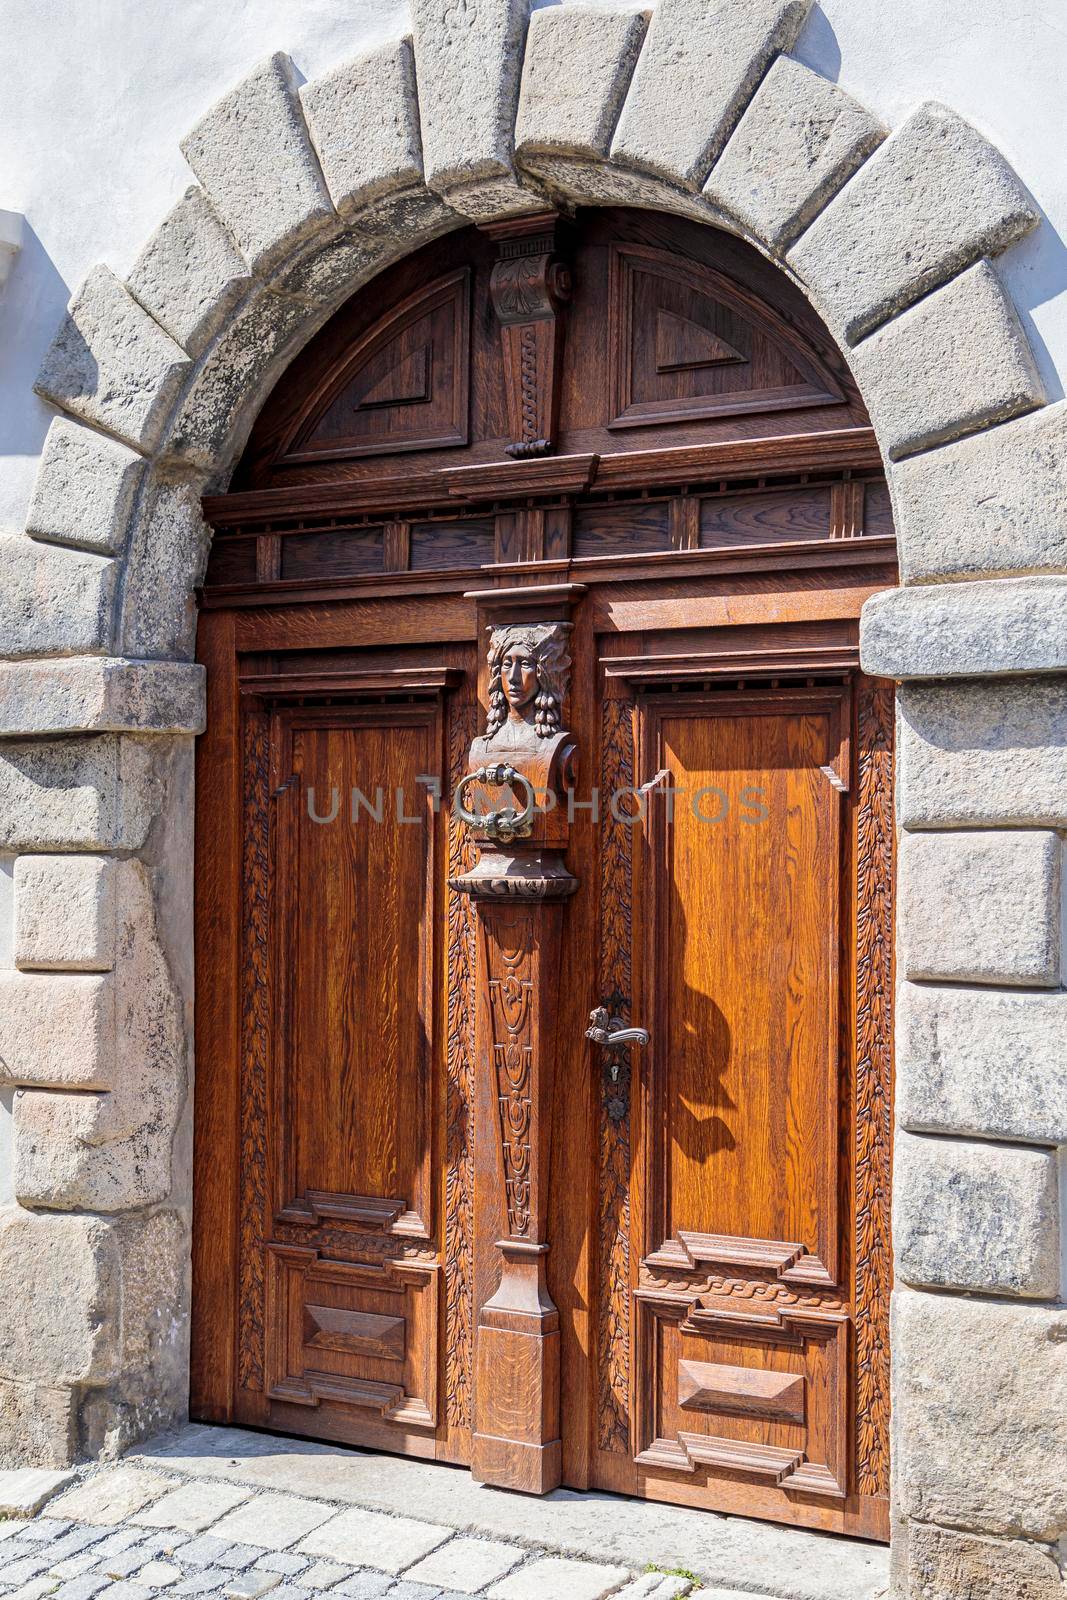 Light brown, antique wooden doors with carvings and patterns. Metal handles made of gold. A semicircular vault. Entrance to the house.